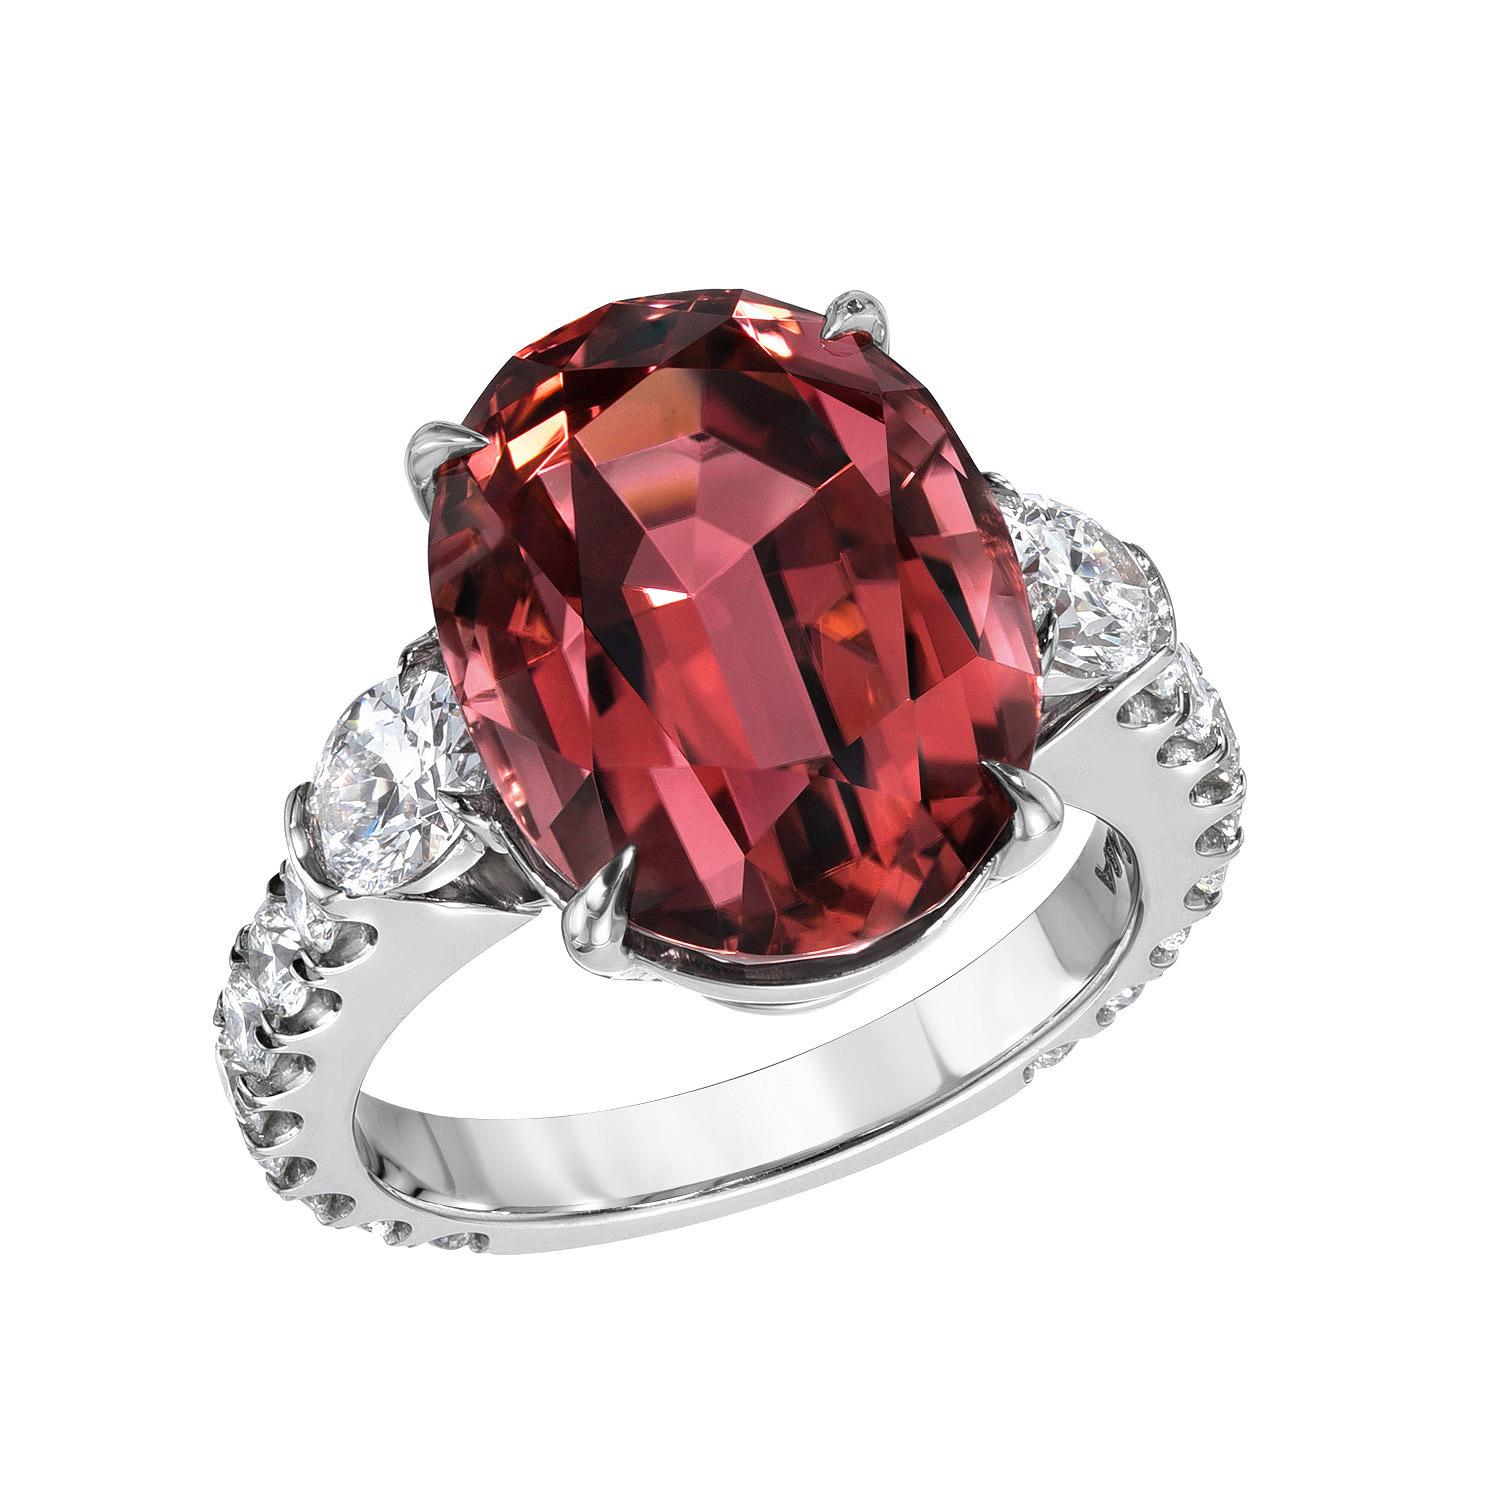 Oval Cut Pink Tourmaline Ring 9.55 Carat Oval For Sale